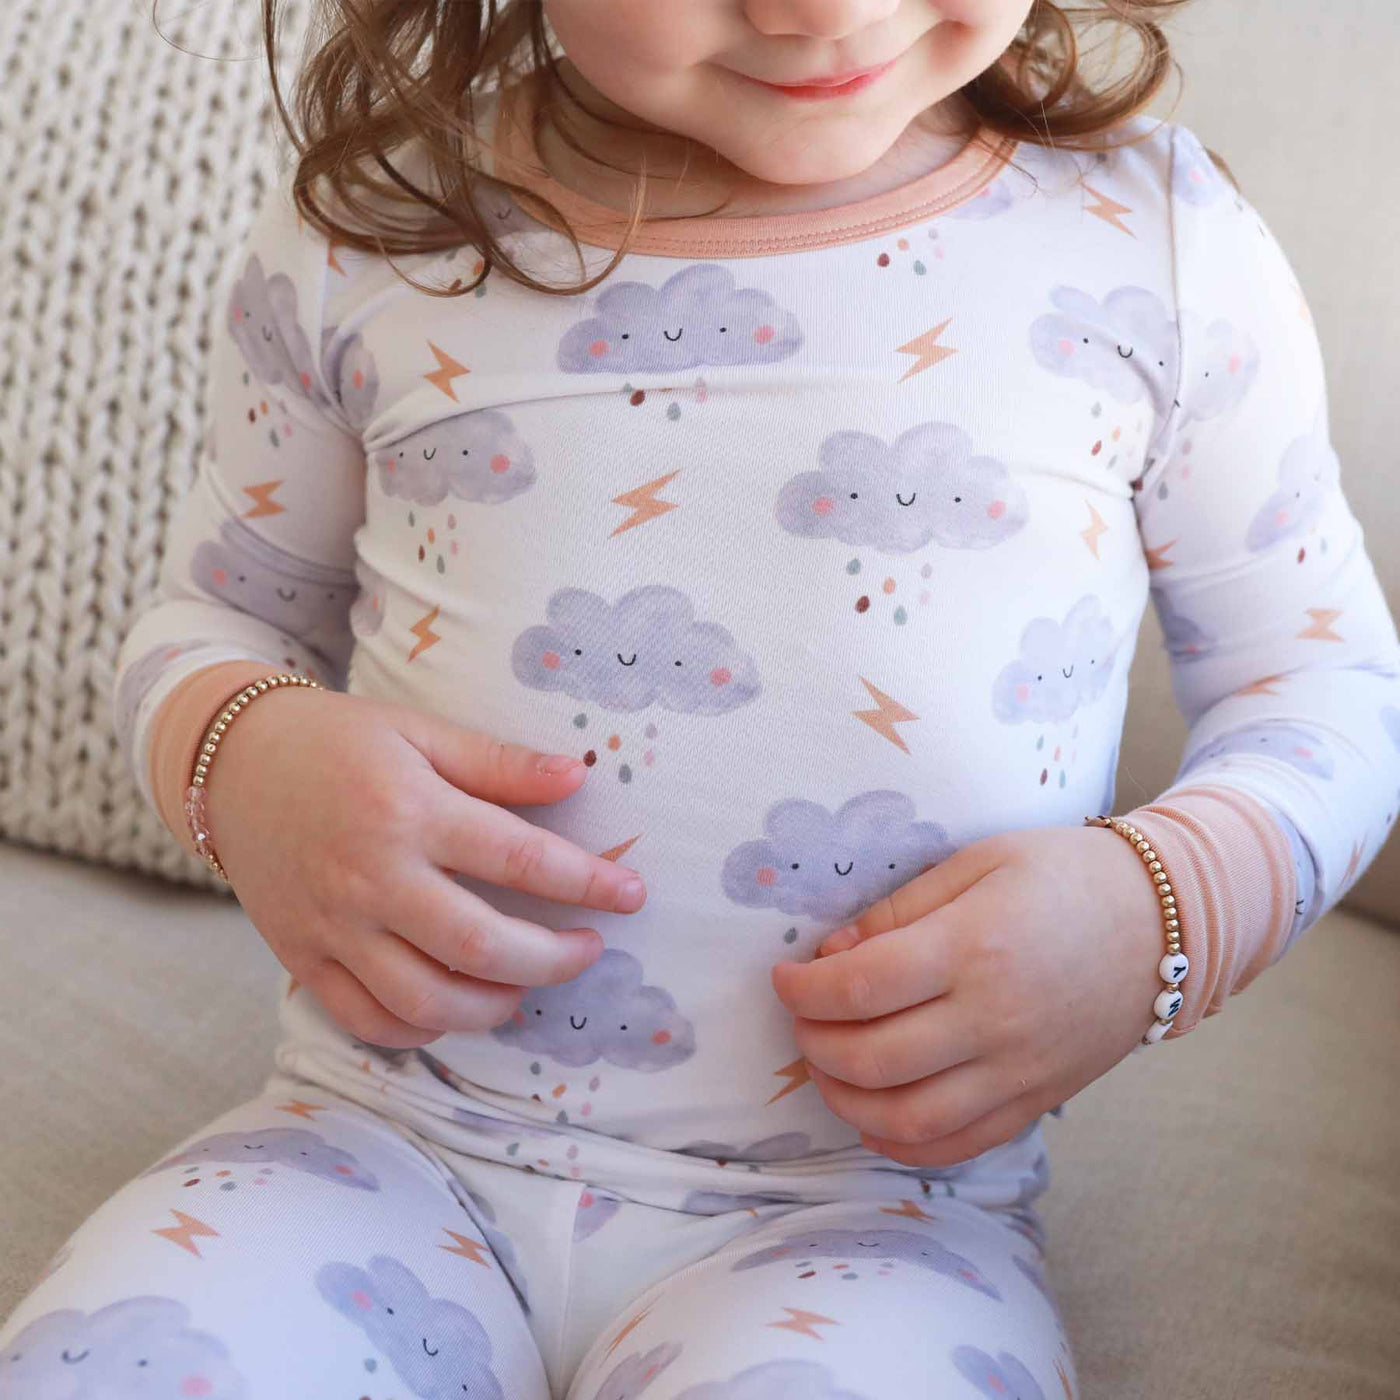 cloudy cuddles two piece pajama set for kids 